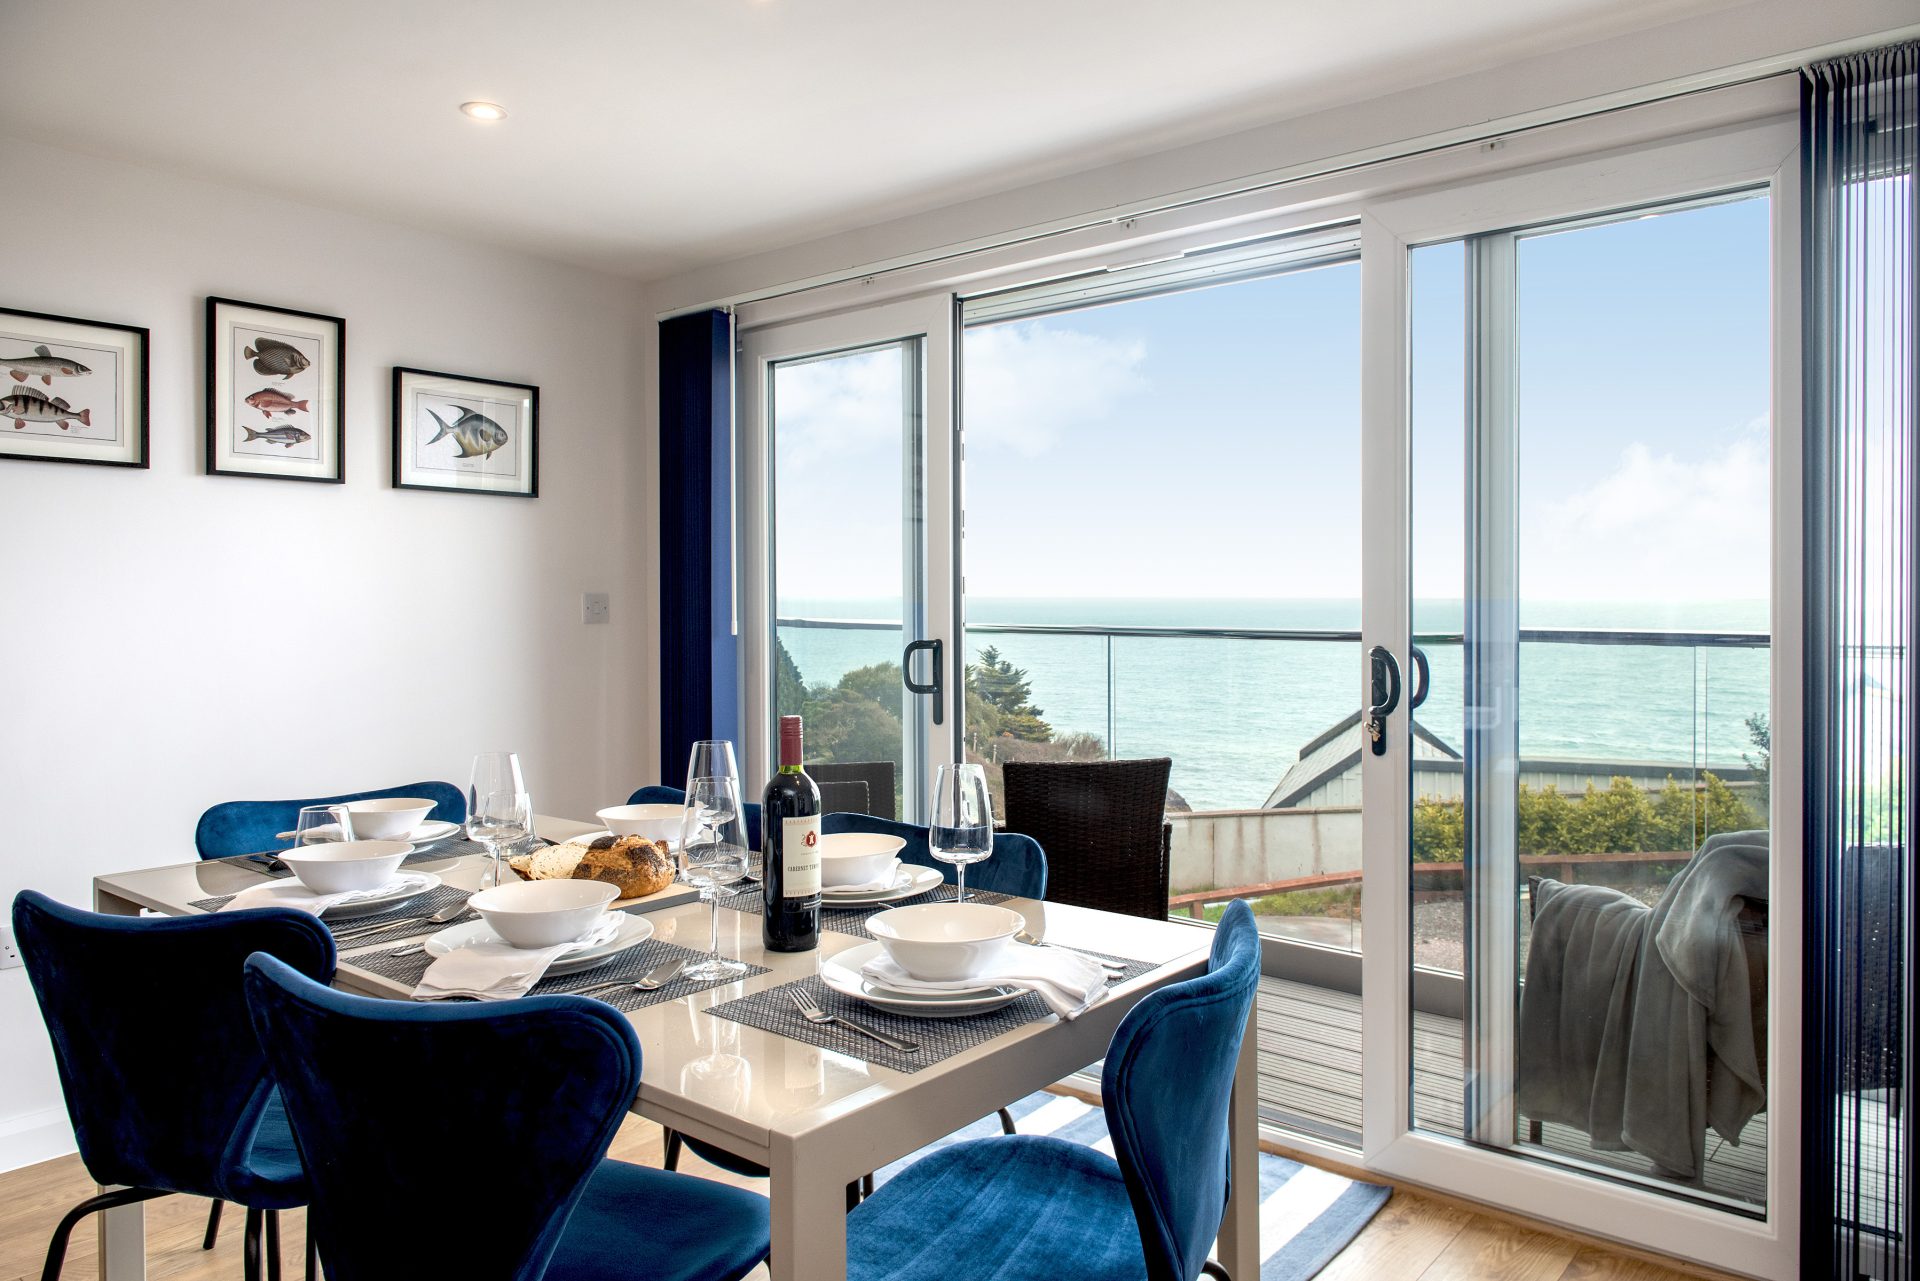 Dining area view with table chairs and large patio doors looking out to sea